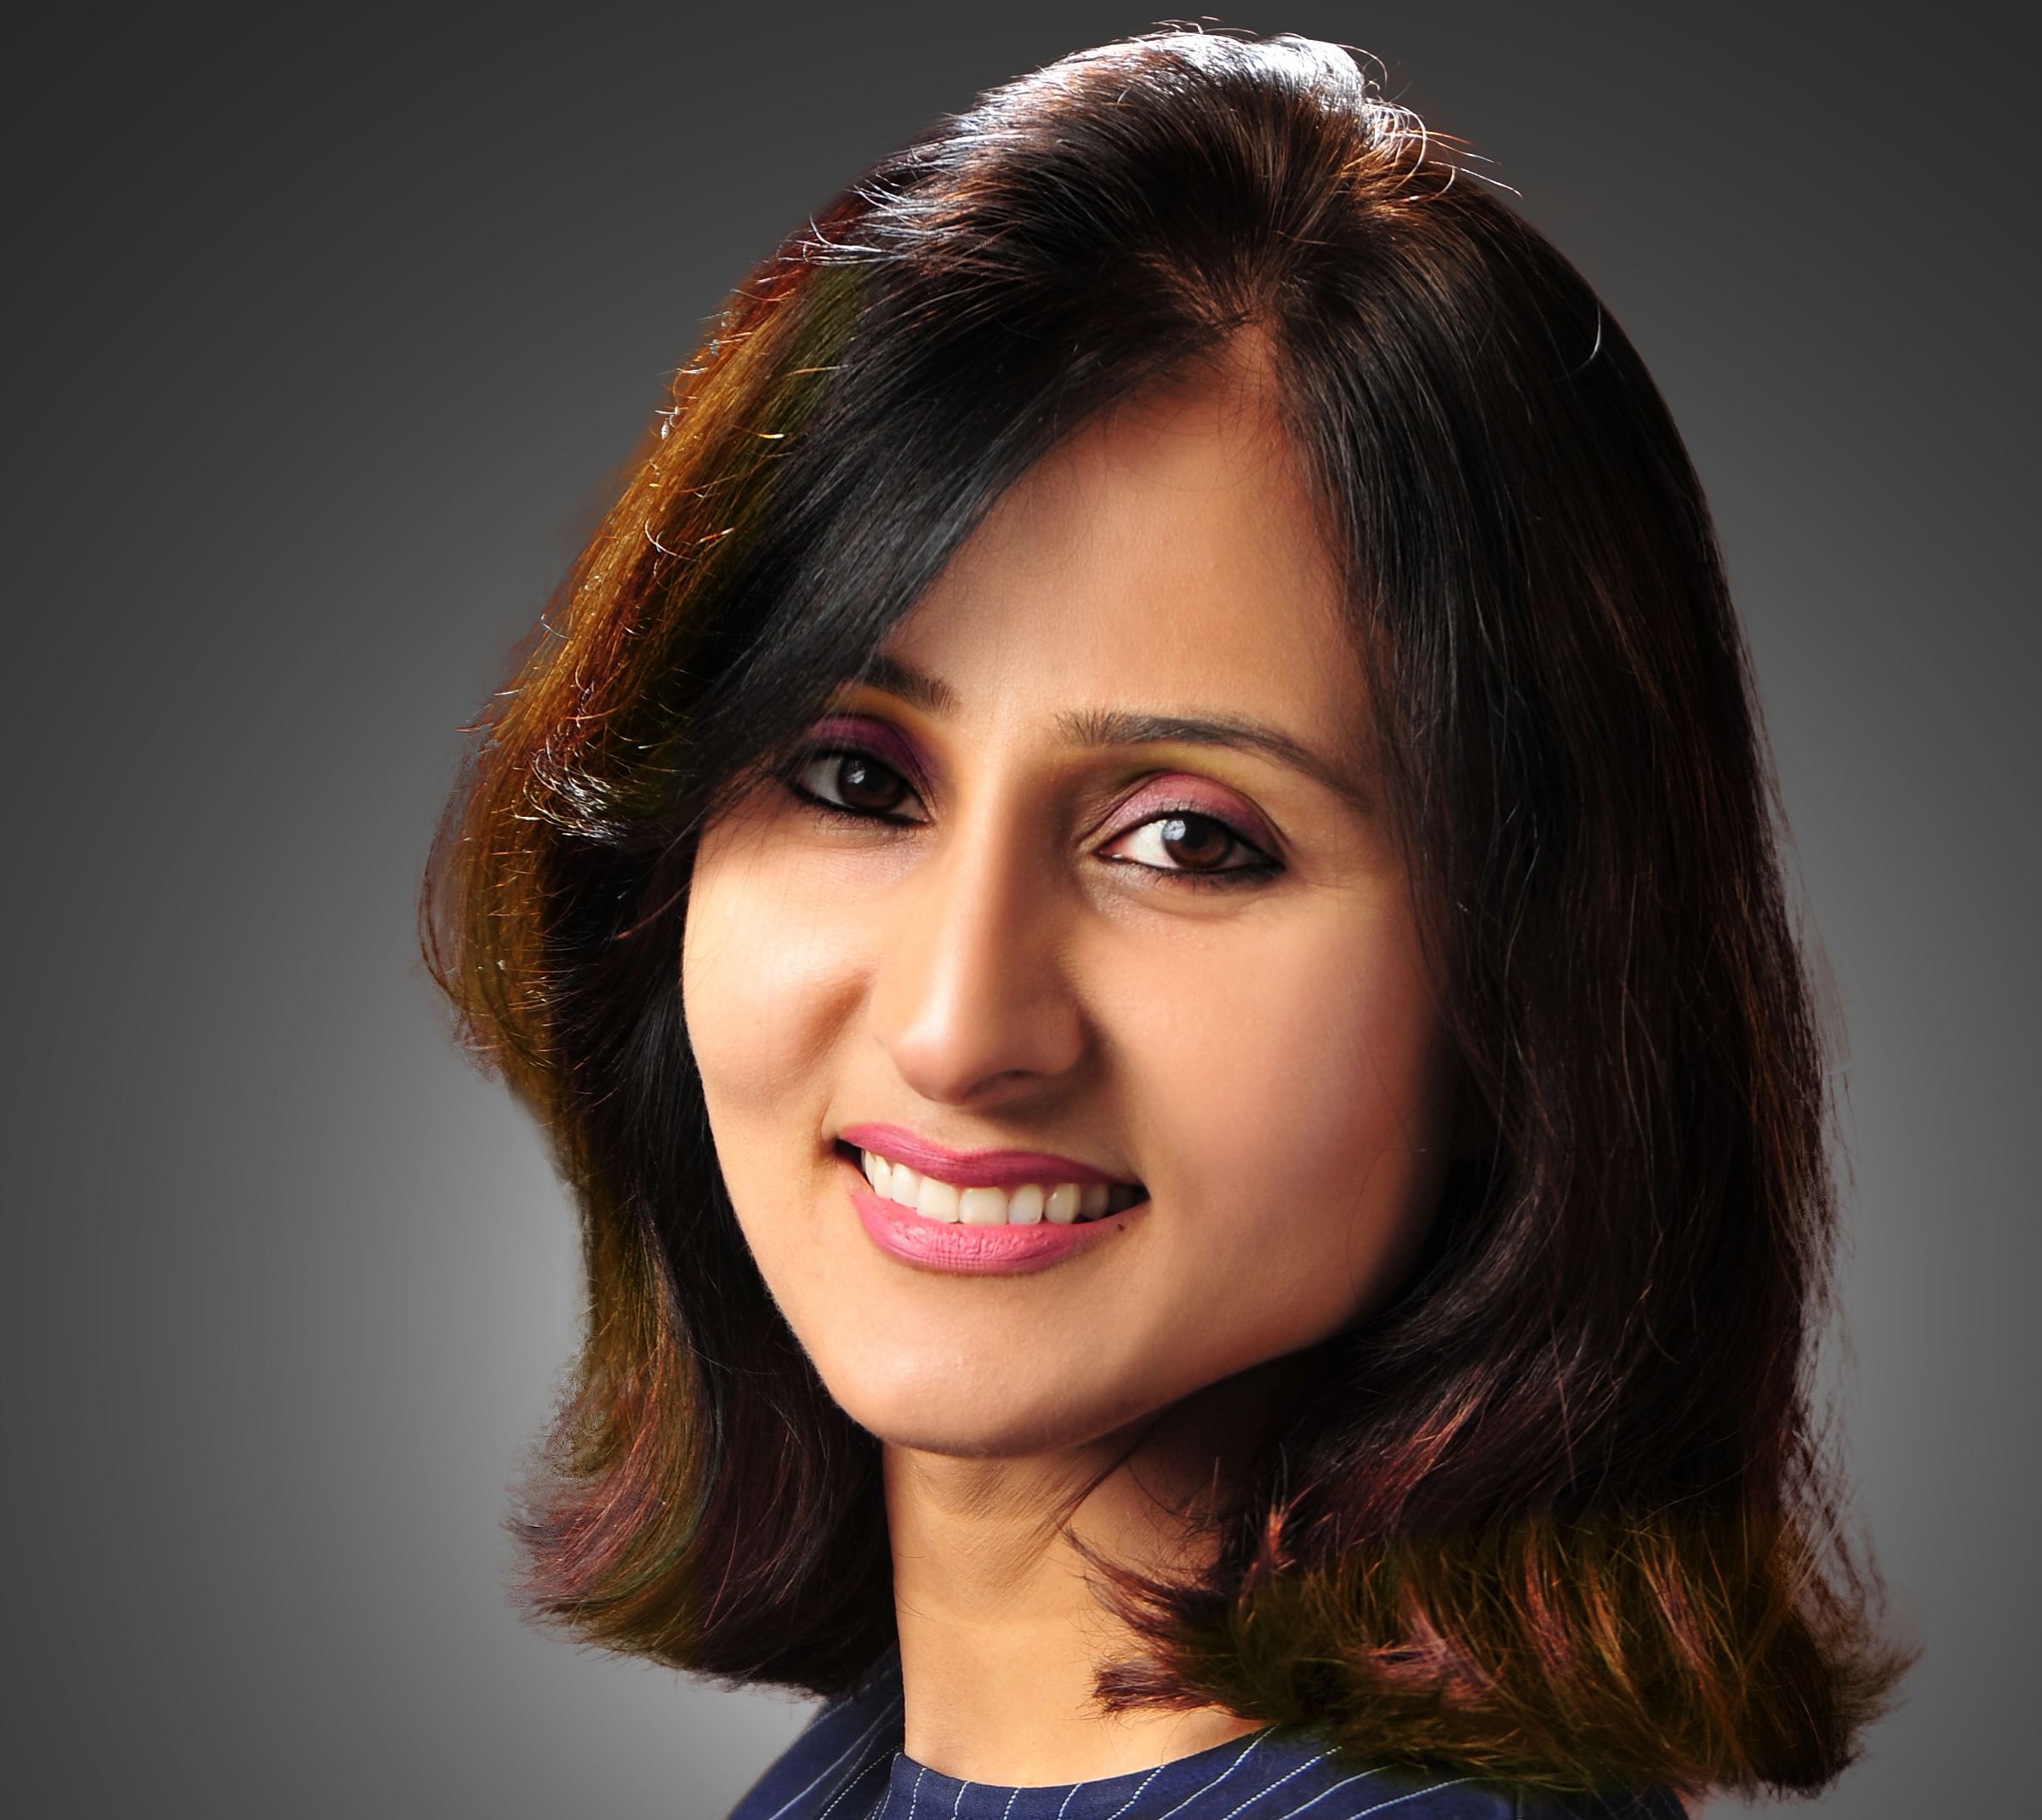 From banking to psychology, how Garima Juneja was able to build a mental health startup during the pandemic 